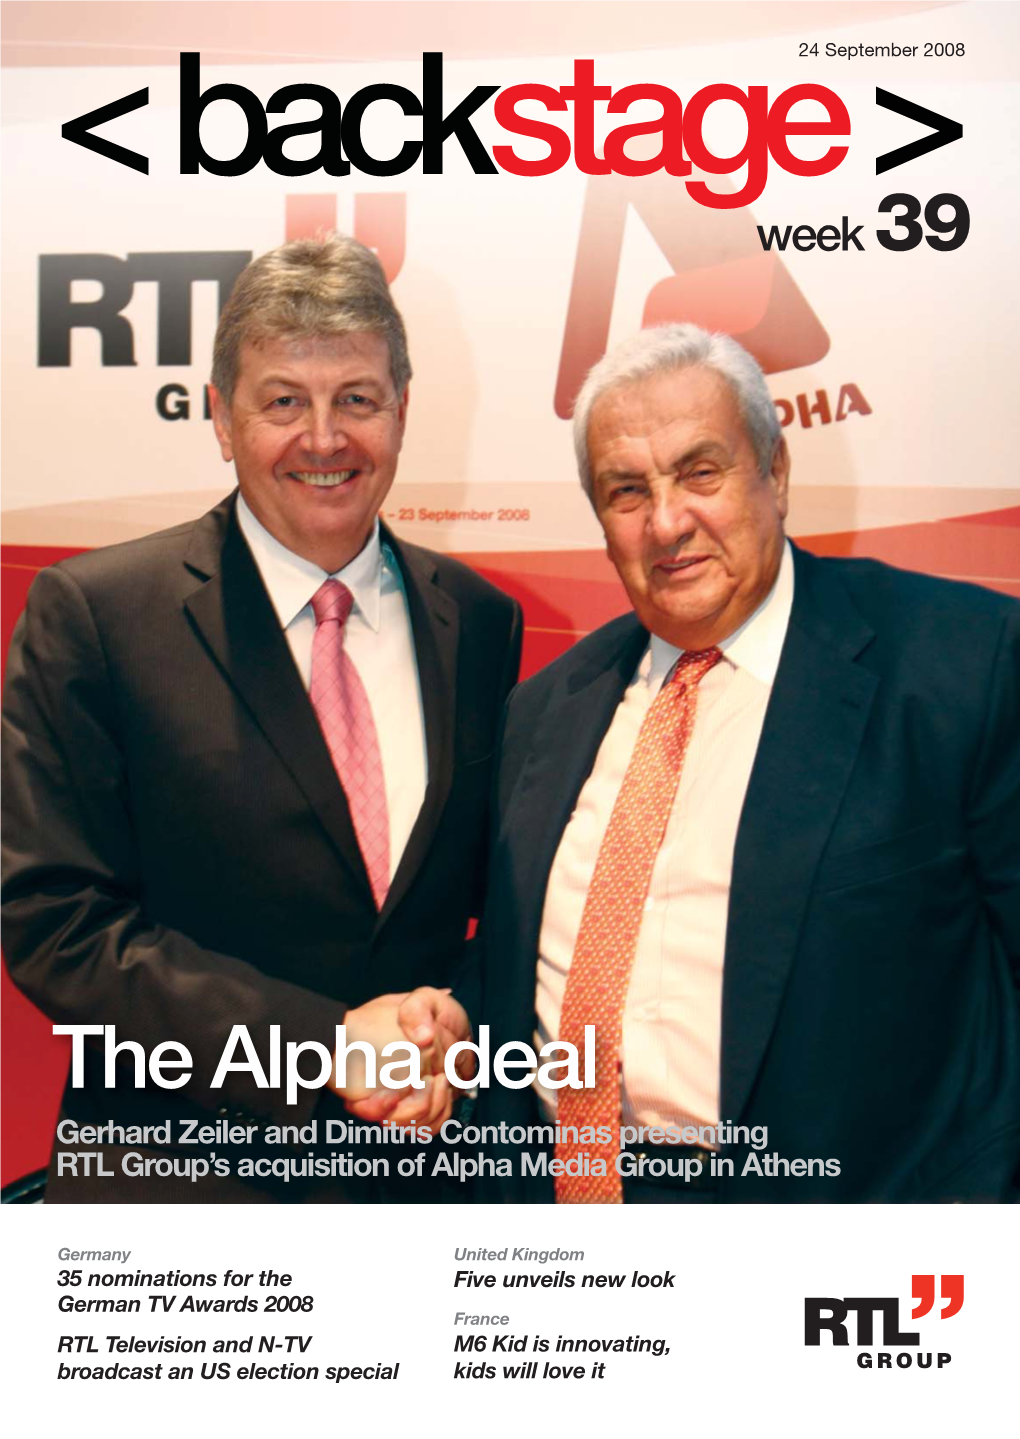 The Alpha Deal Gerhard Zeiler and Dimitris Contominas Presenting RTL Group’S Acquisition of Alpha Media Group in Athens